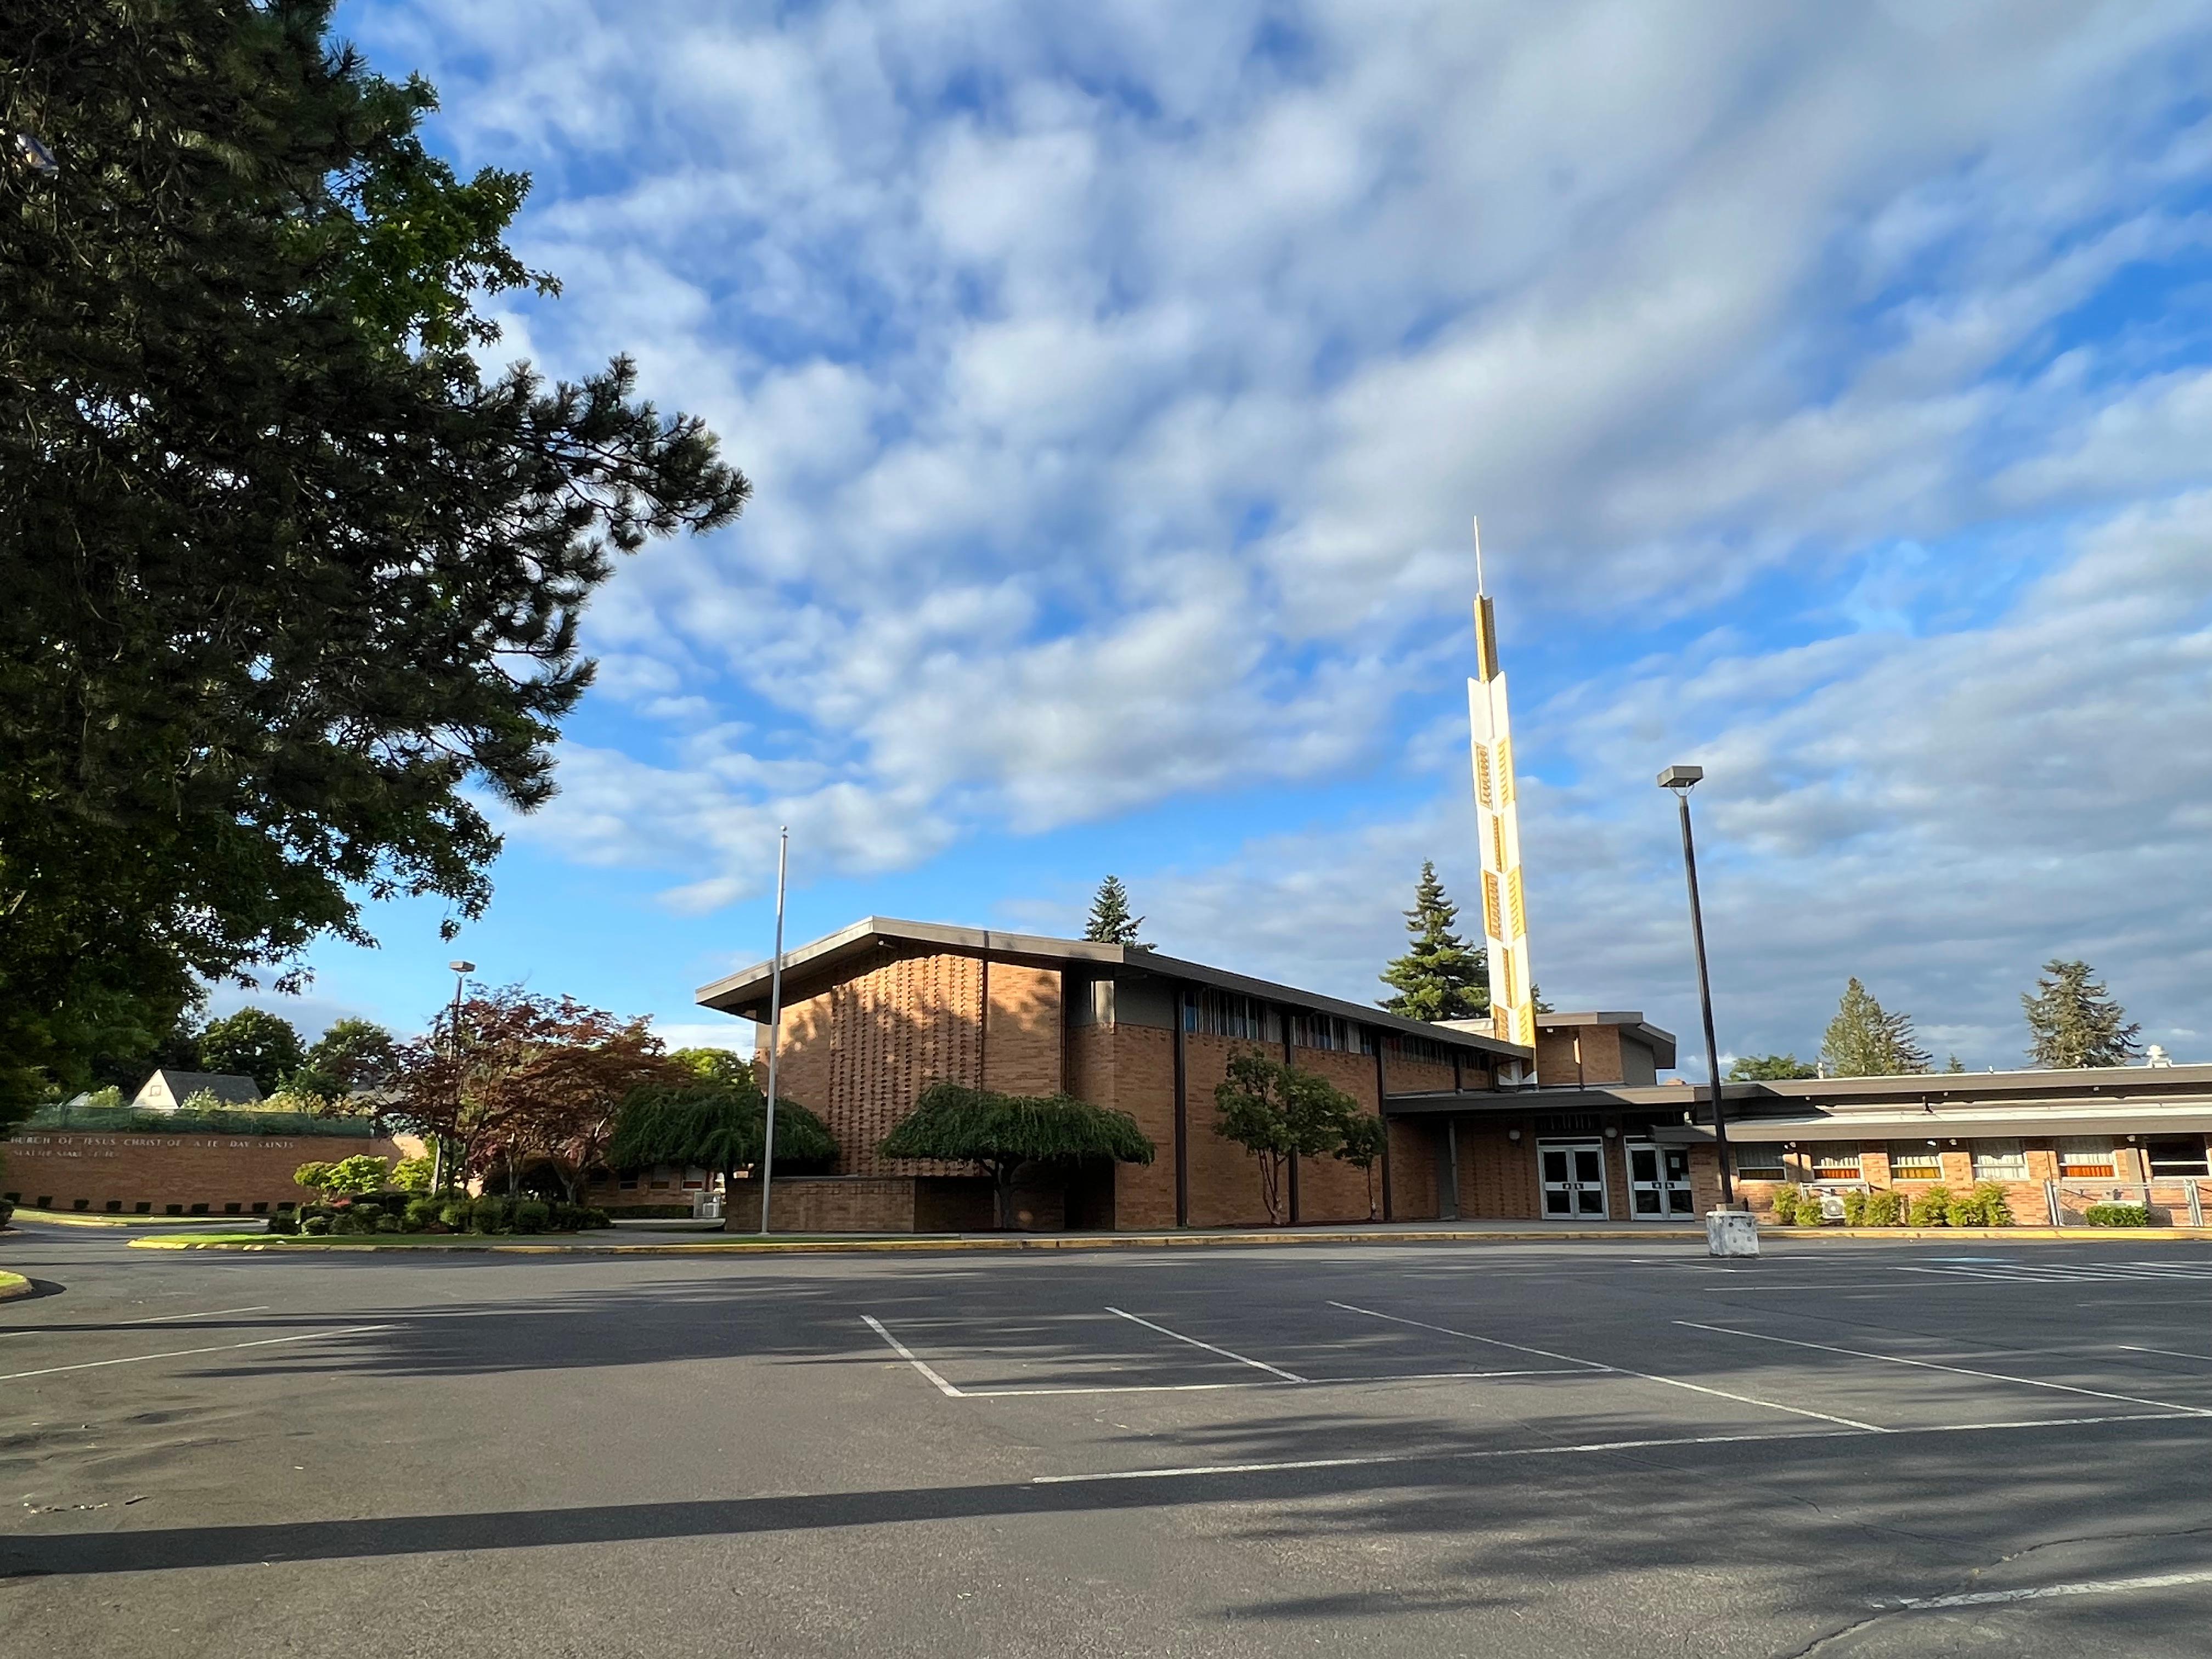 Seattle Stake Center of the Church of Jesus Christ of Latter-Day Saints located in Seattle, Washington